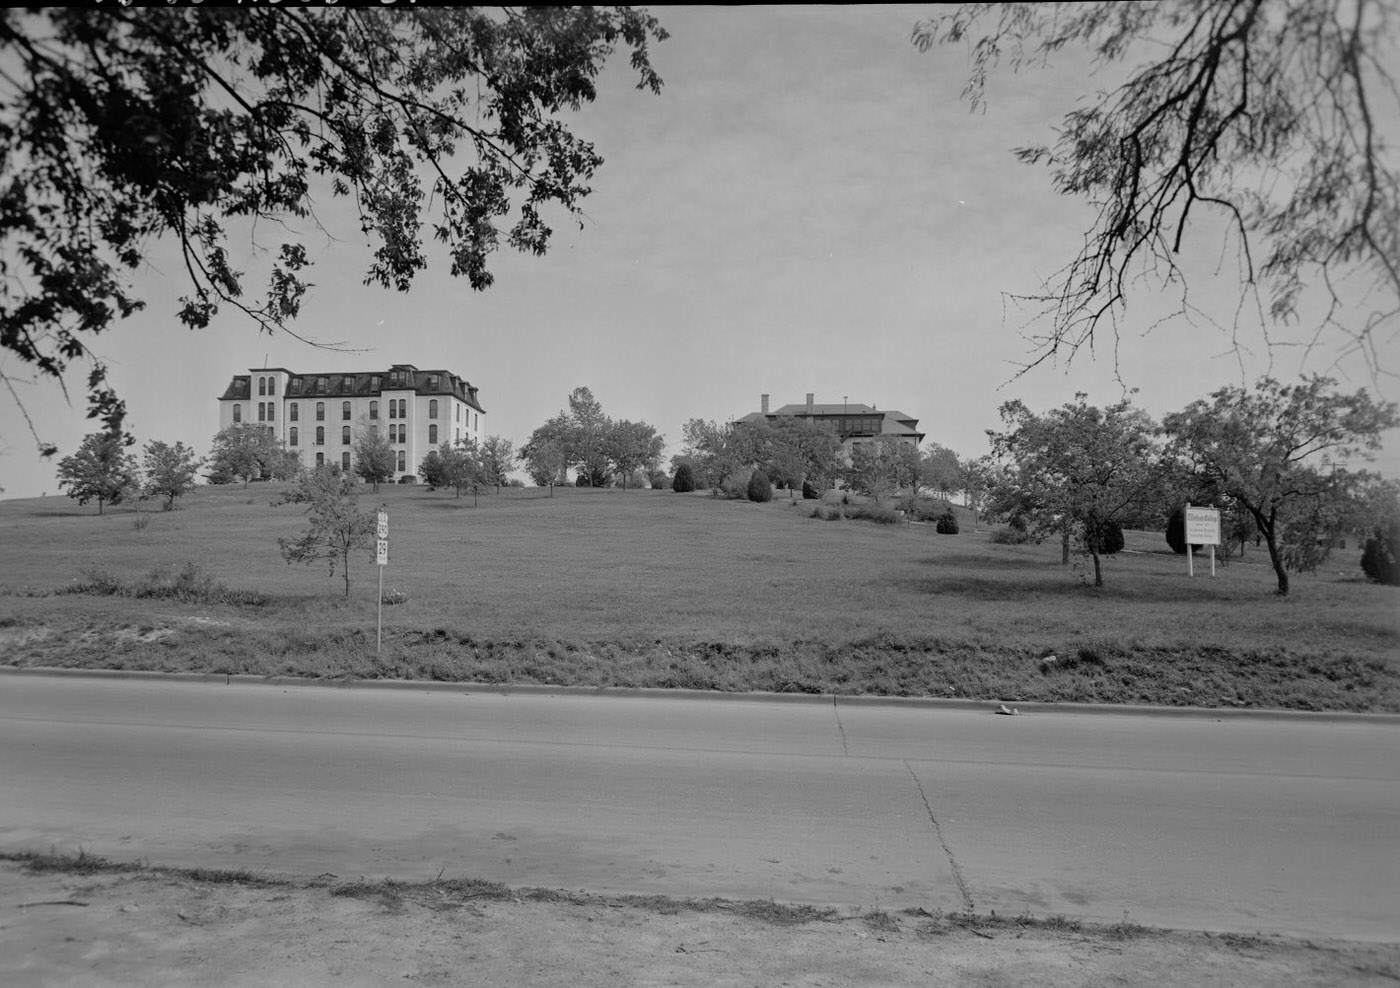 Exterior View of Tillotson College Buildings on a Hill, 1950.